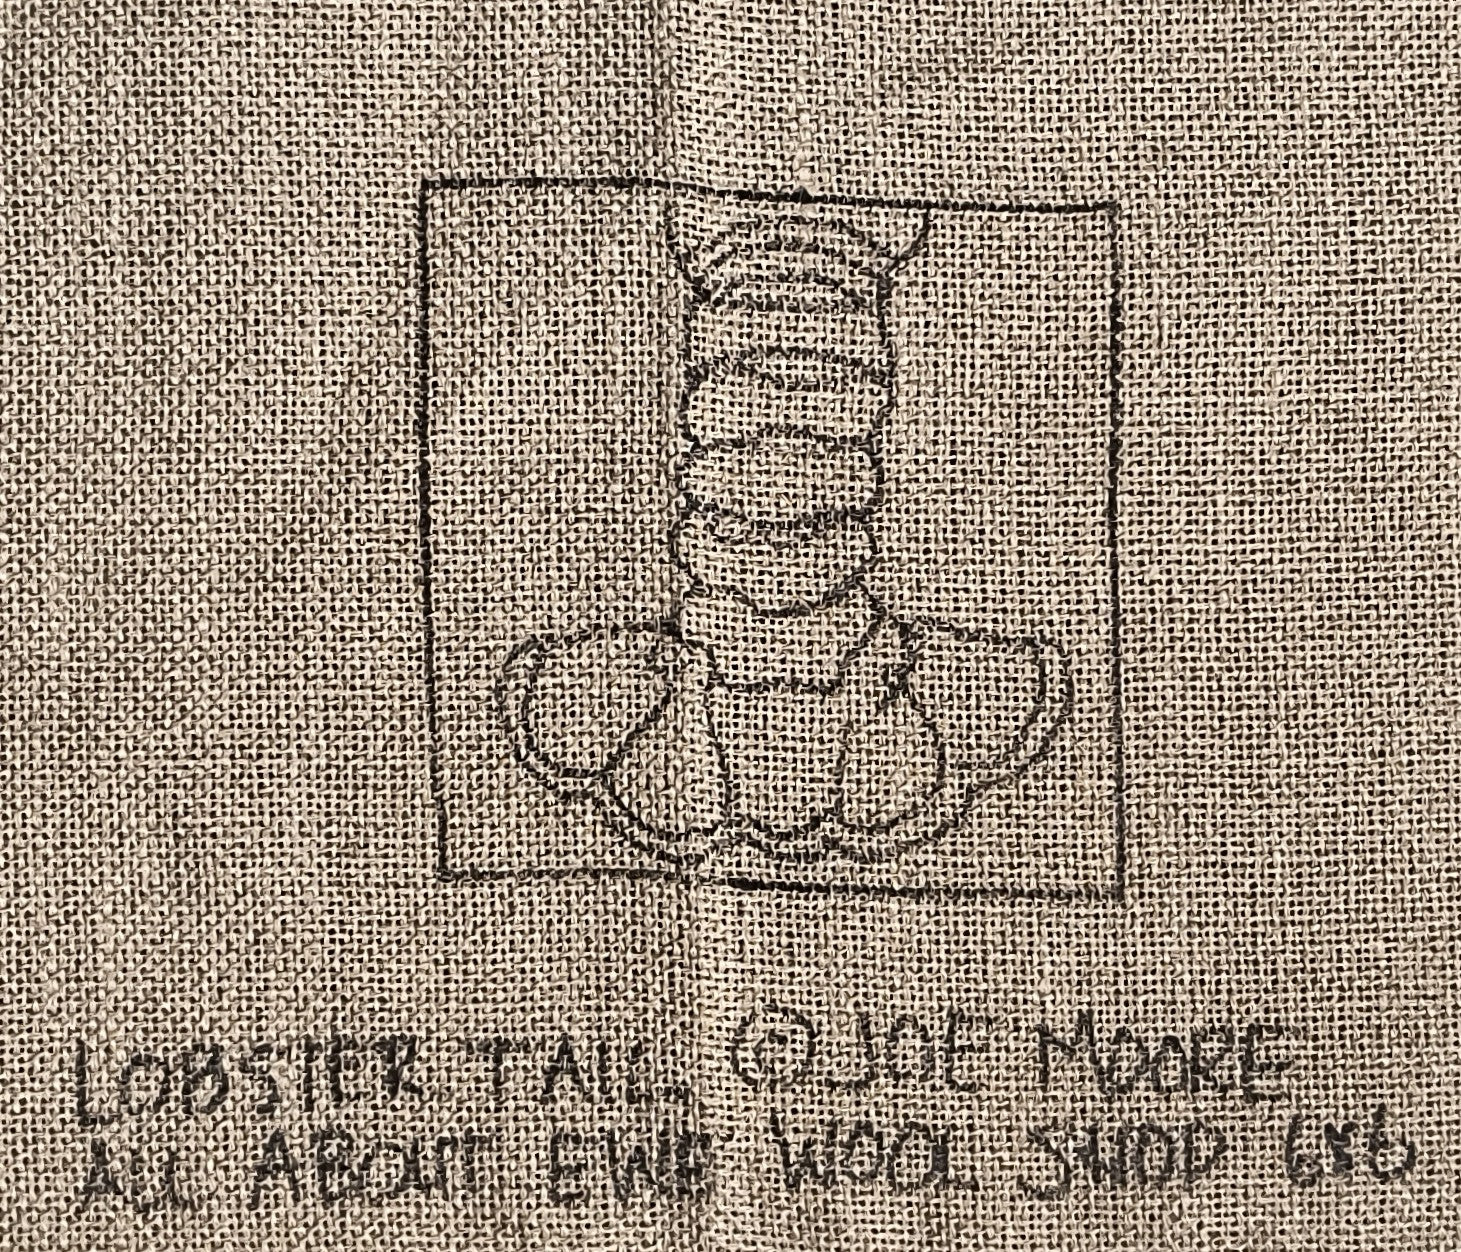 a close up of a piece of cloth with a drawing on it